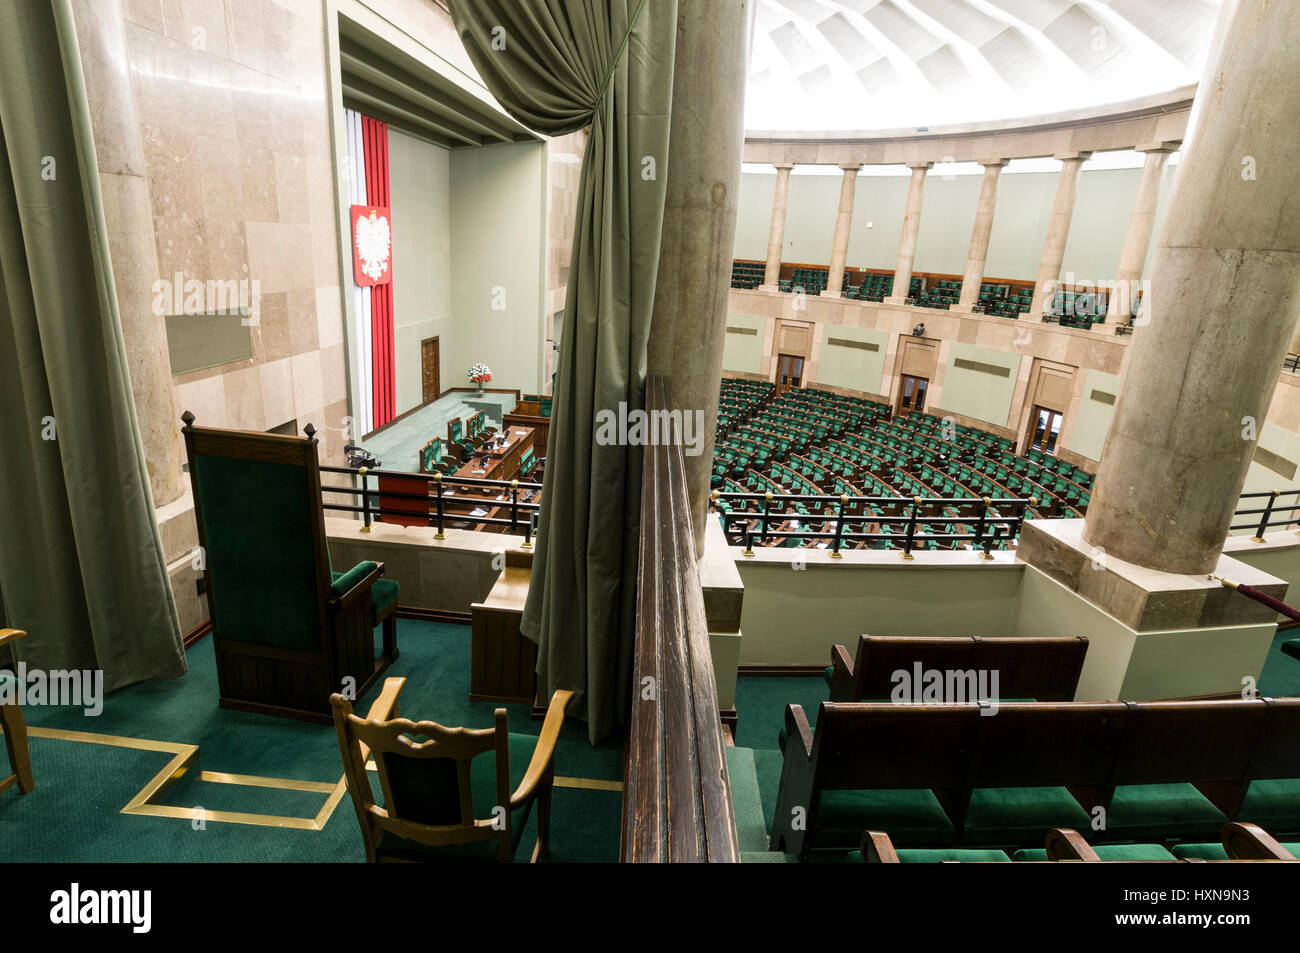 The Polish Sejim Debate Hall  of the Polish Parliament in Warsaw, Poland.  The single chair on the left is where the Polish President sits during deba Stock Photo